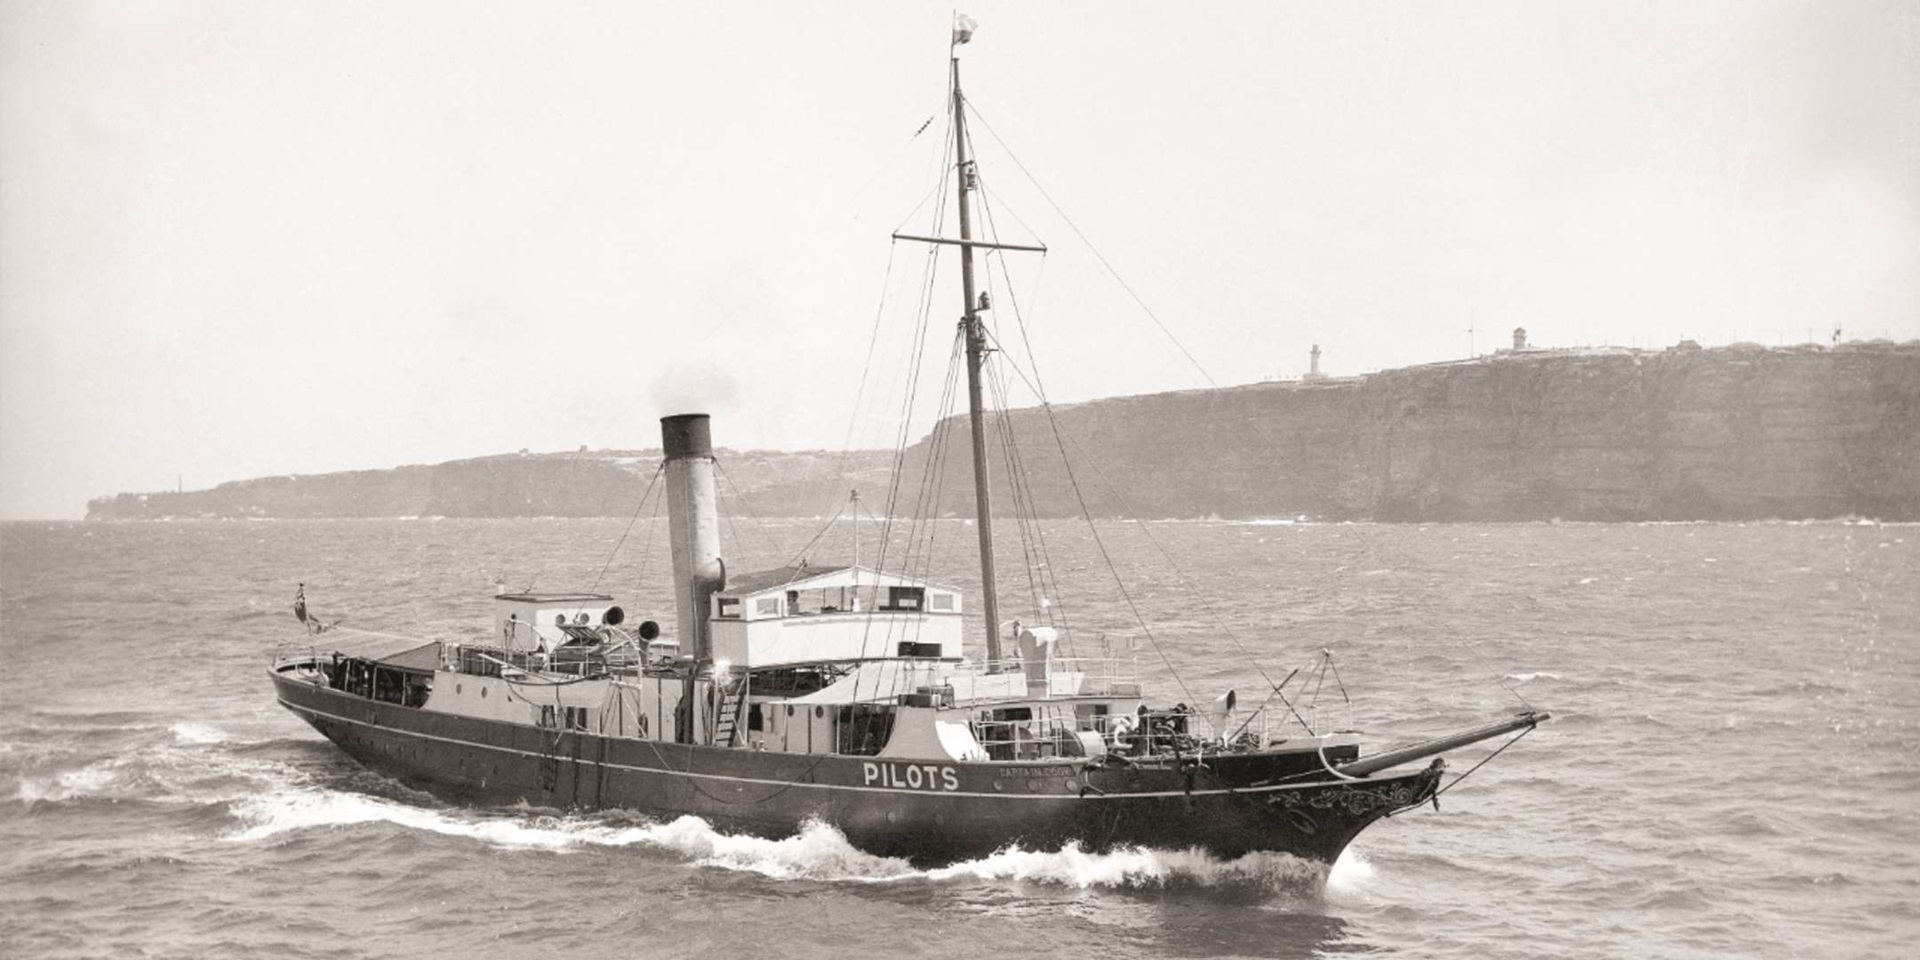 The second pilot steamer  Captain Cook (II) was designed by W D Cruikshank and built at Mort’s Dock & Engineering Company in 1892. Used as a naval training ship during World War II, it was scuttled off Sydney in October 1947. Photographed c 1920 by William James Hall. ANMM Collection ANMS1092[015] Gift from Mr and Mrs Glassford